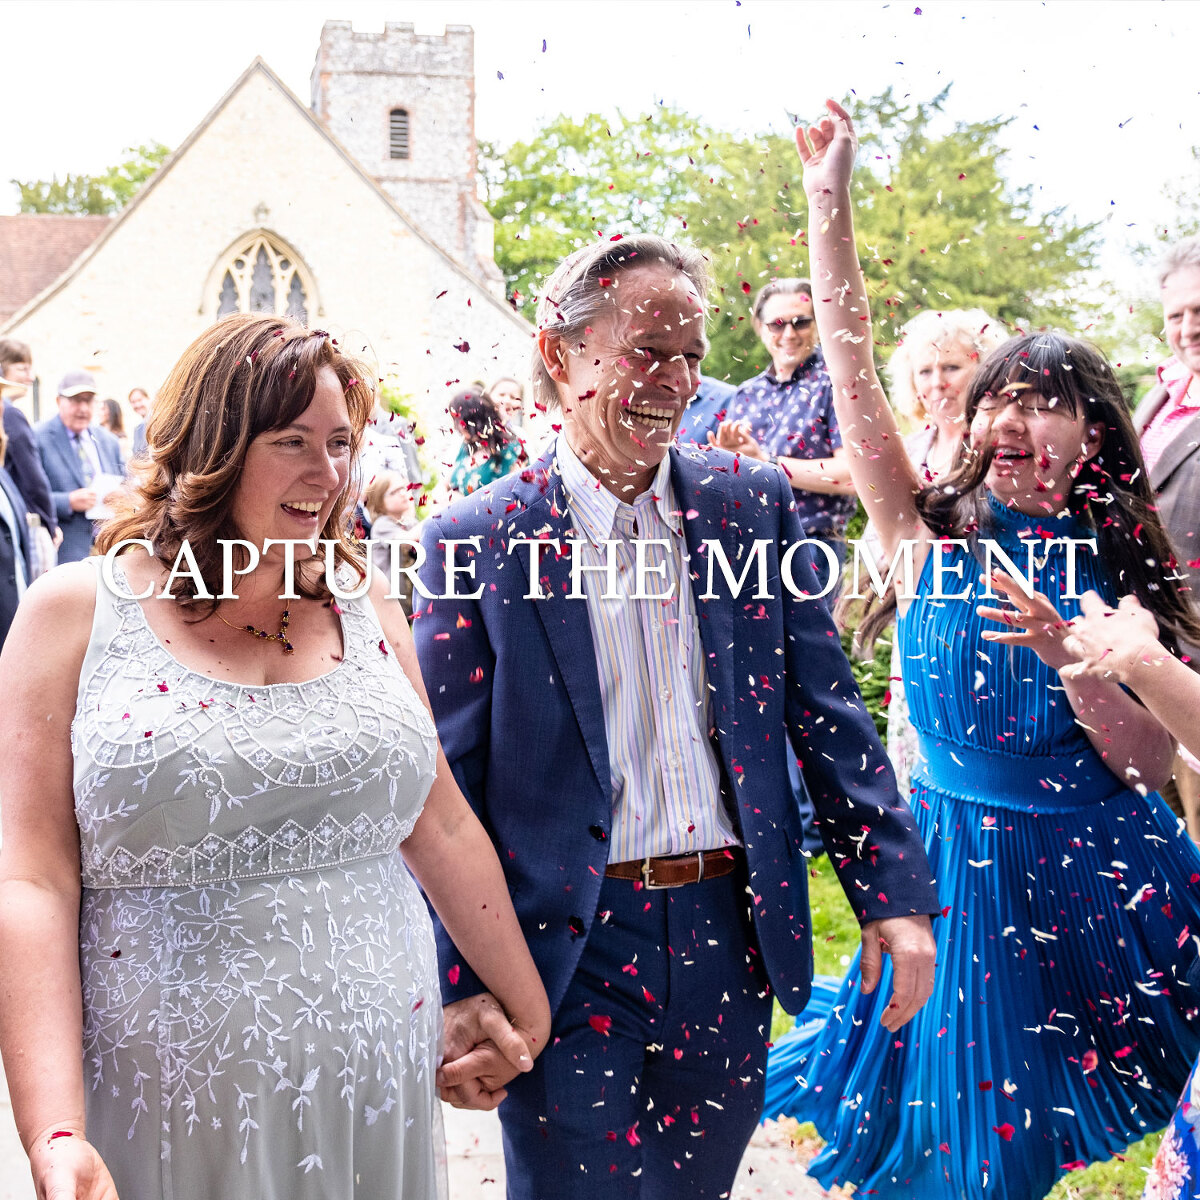 Documentary Wedding Photographer in Surrey - Capture the Moment